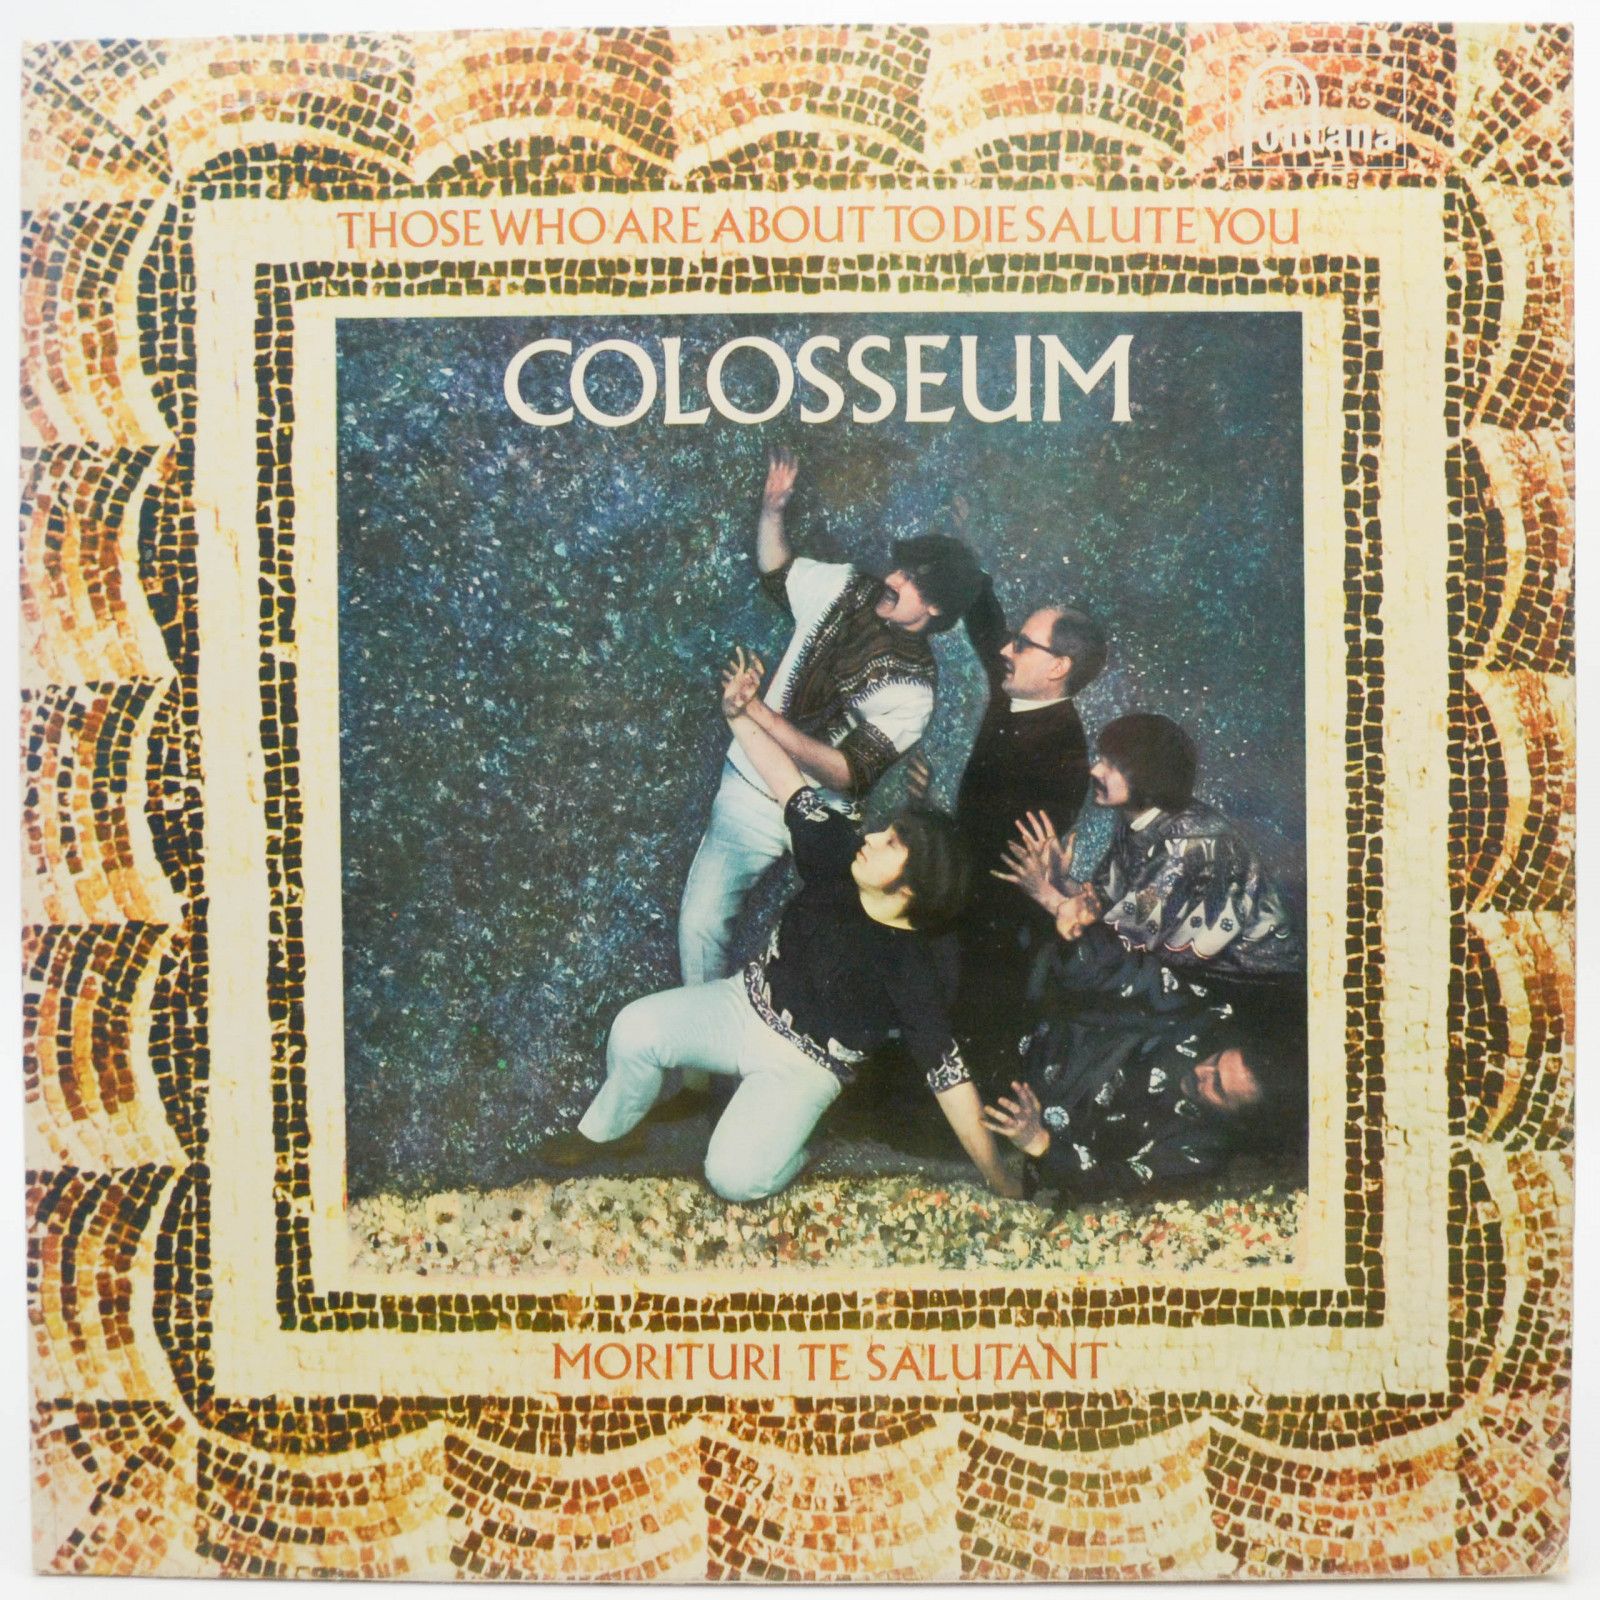 Colosseum — Those Who Are About To Die Salute You (1-st, UK), 1969